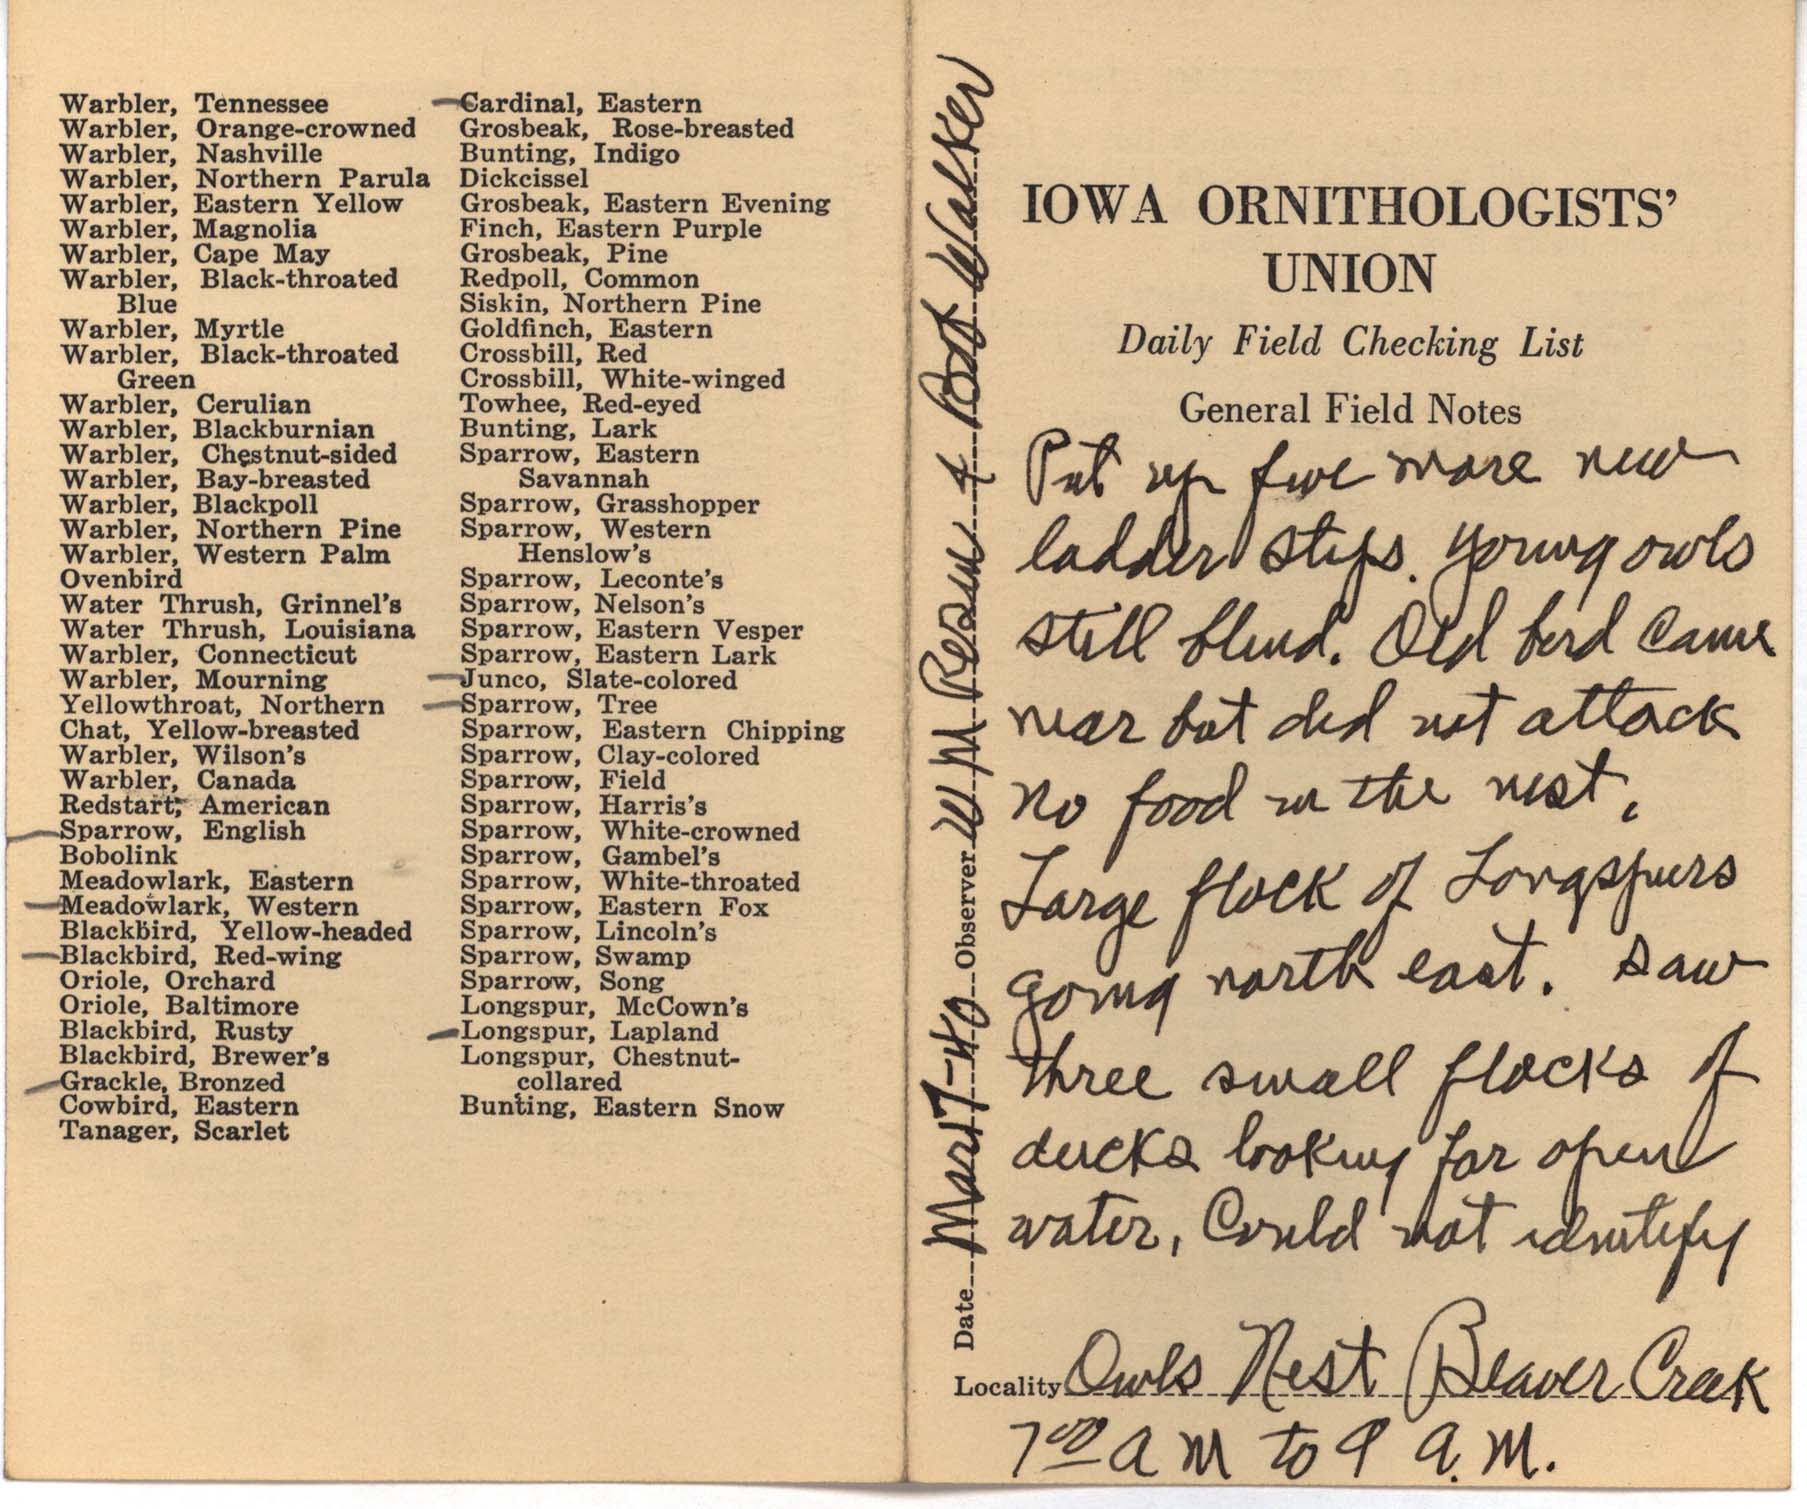 Daily field checking list by Walter Rosene, March 17, 1940